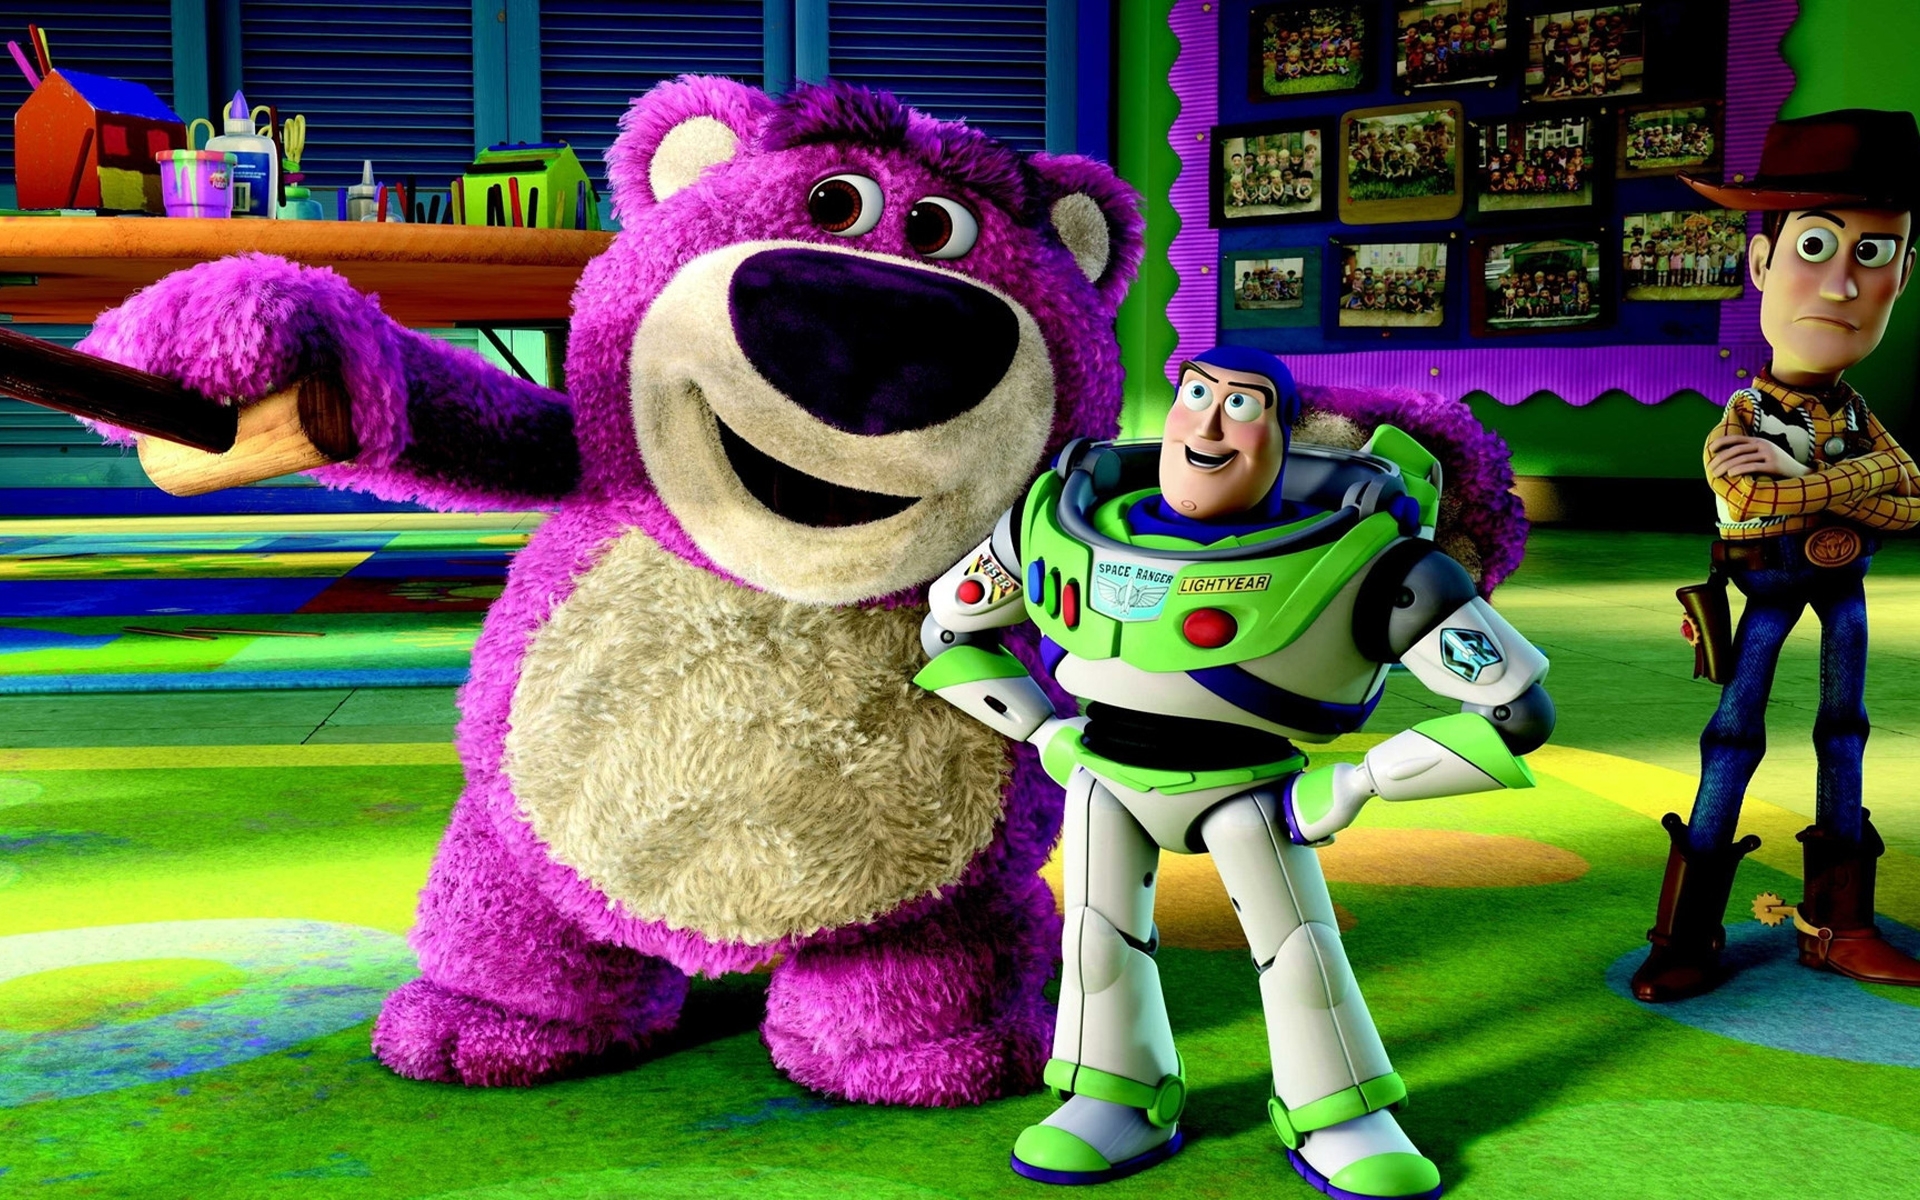 Toy Story 3 Picture